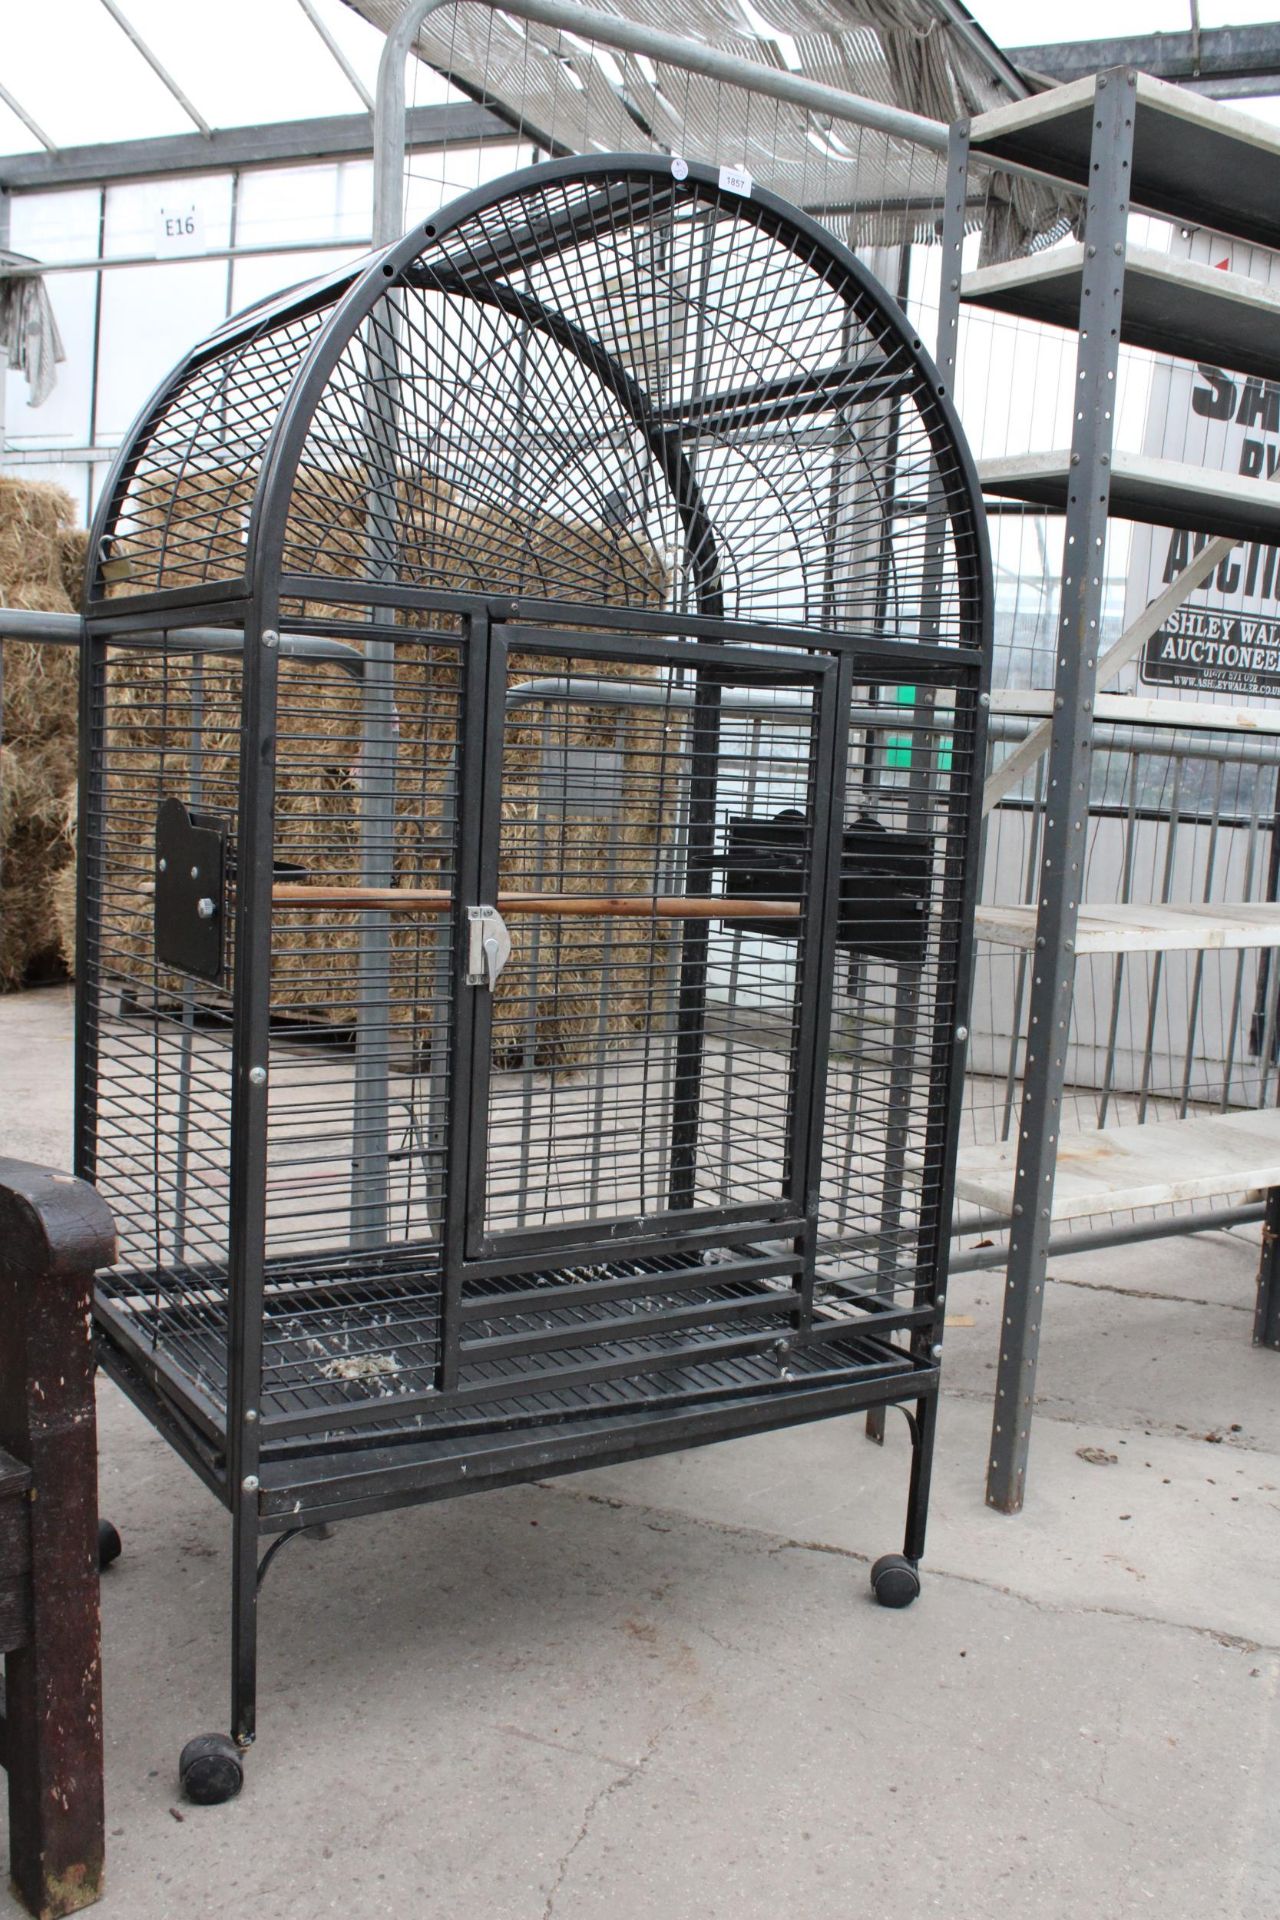 A LARGE METAL PARROT CAGE - Image 2 of 3